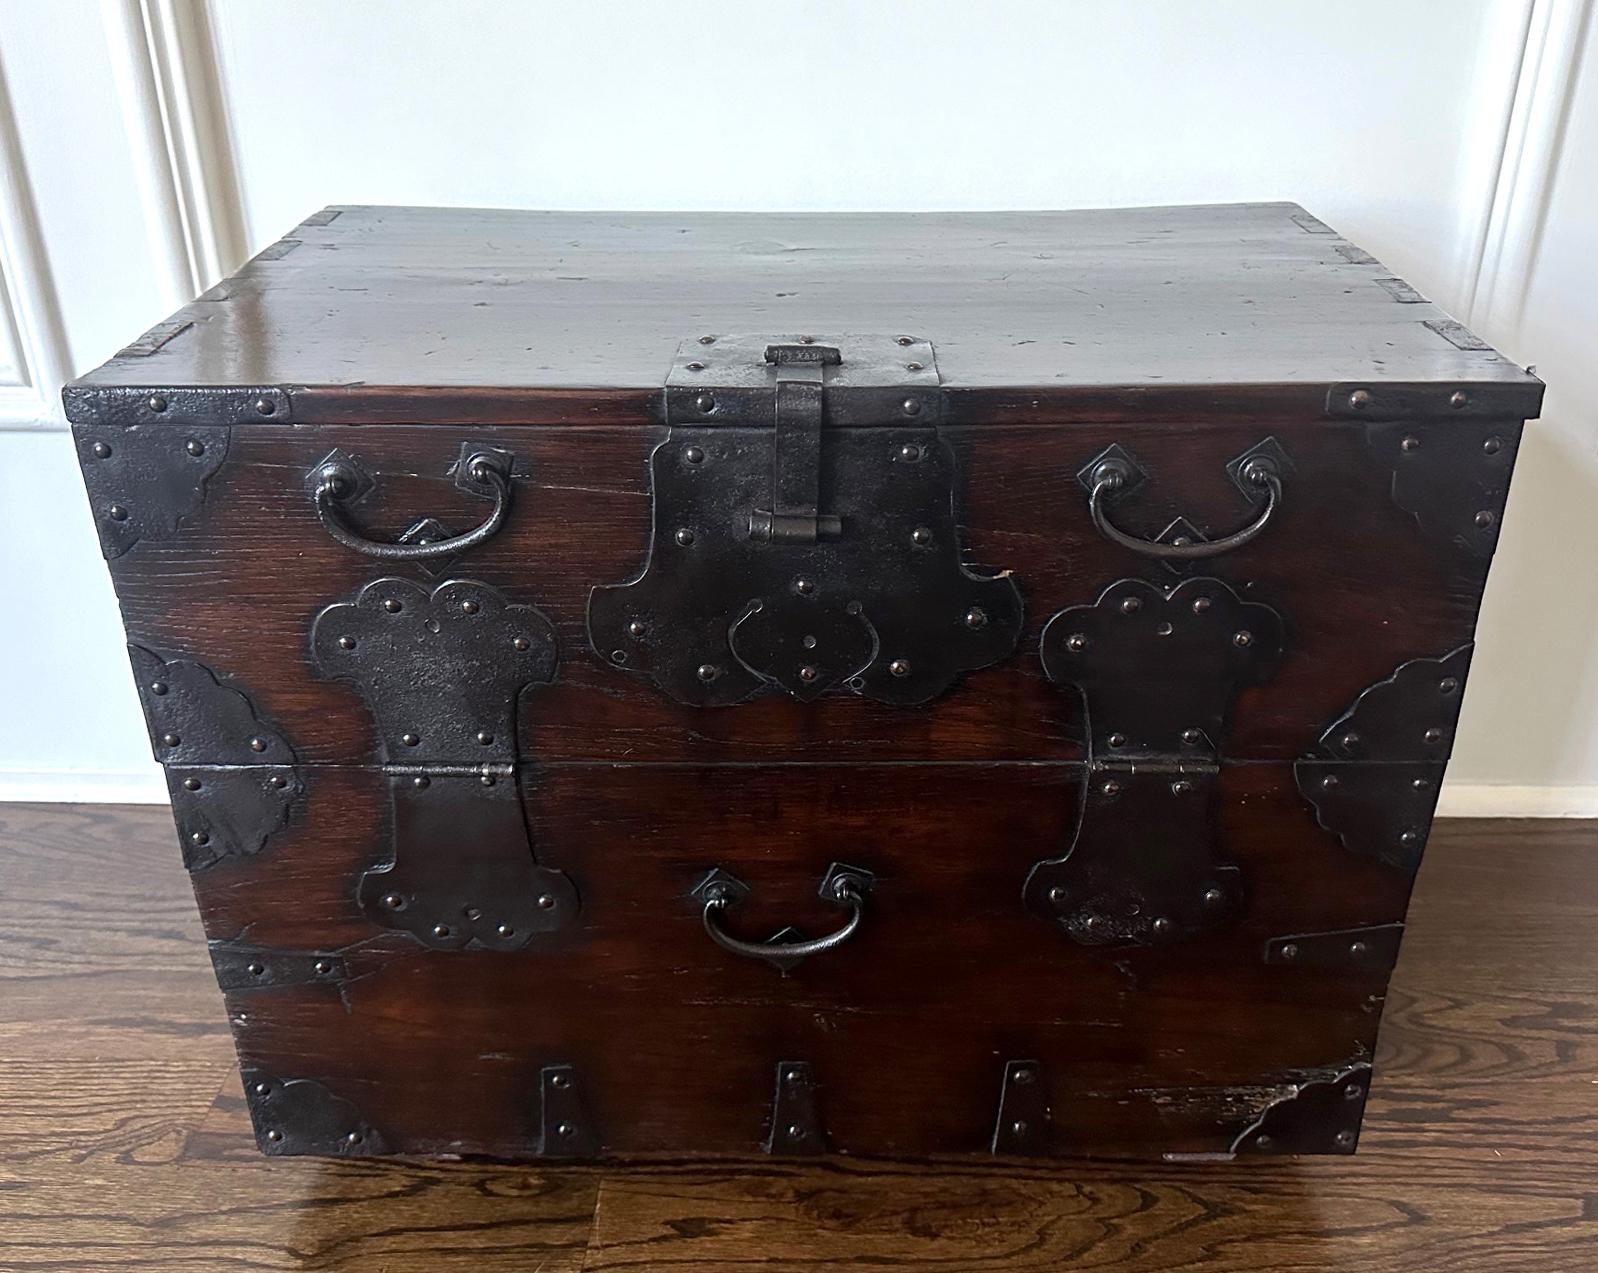 An antique Bandaji chest from Korea circa late 19th century Joseon Dynasty. The relatively small open-front cabinet was constructed from stained elm wood and fitted with thin hammered iron hardware. It was produced Changhung area (nowadays